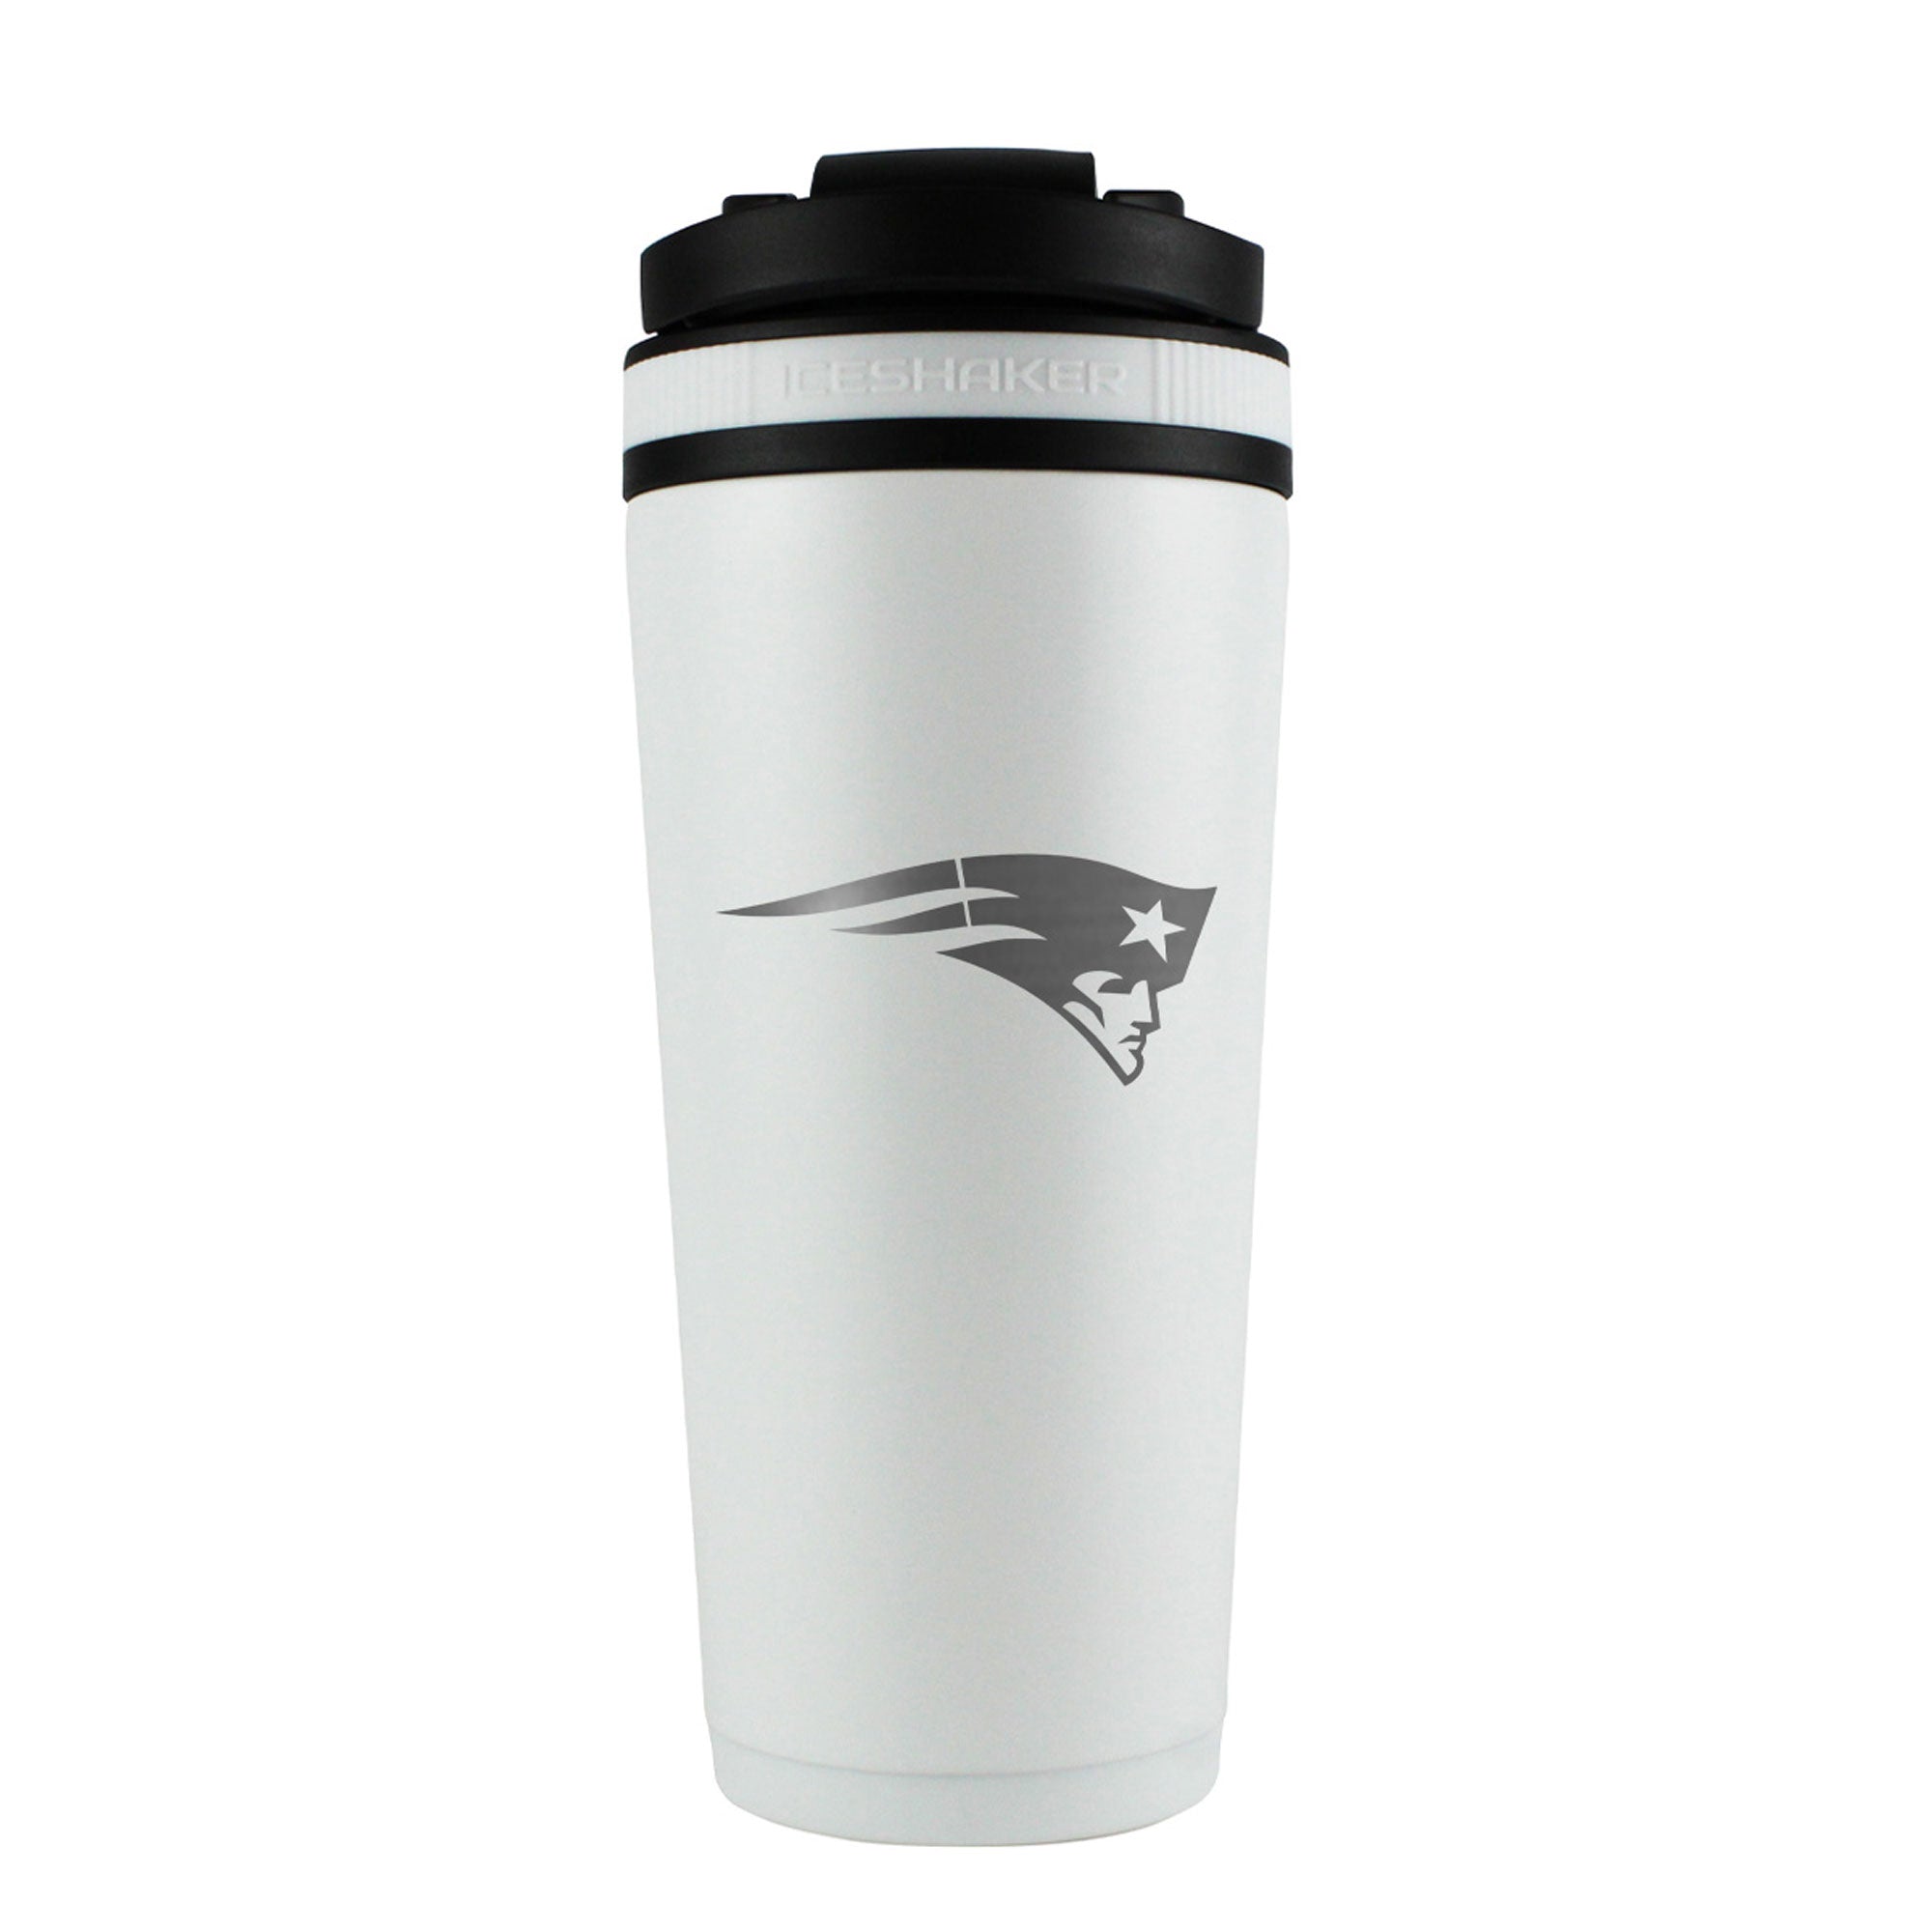 Officially Licensed New England Patriots 26oz Ice Shaker - White